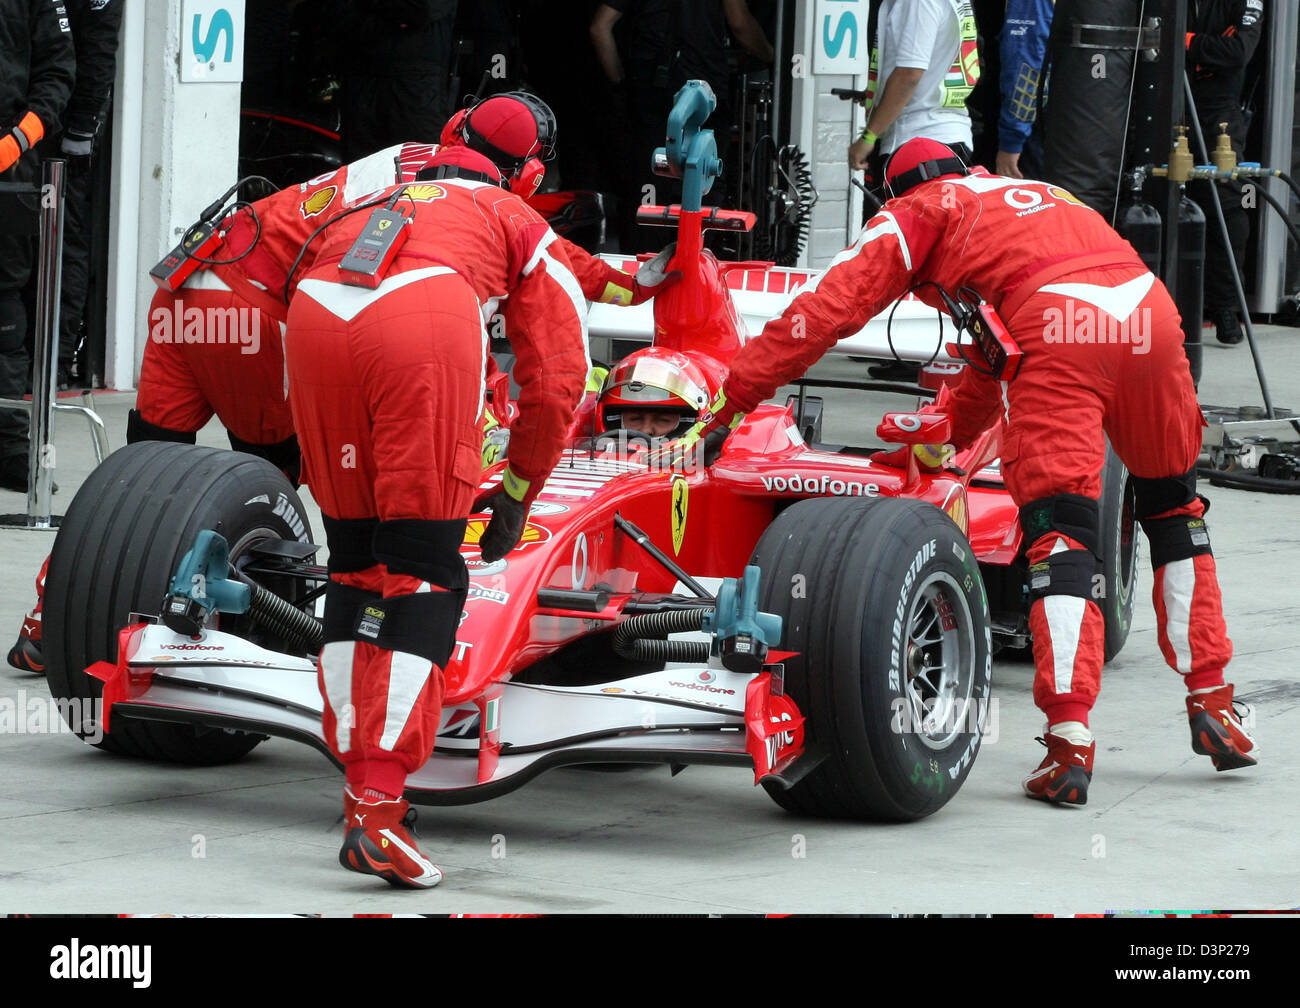 German Formula One driver Michael Schumacher of team Scuderia Ferrari and his racing car are pushed back into the garage during the third practice session of the 2006 Hungarian Grand Prix at the Hungaroring racetrack near Budapest, Hungary, Saturday, 05 August 2006. Schumacher was docked two seconds for overtaking two cars under red flags during Saturday's final practice and lost t Stock Photo